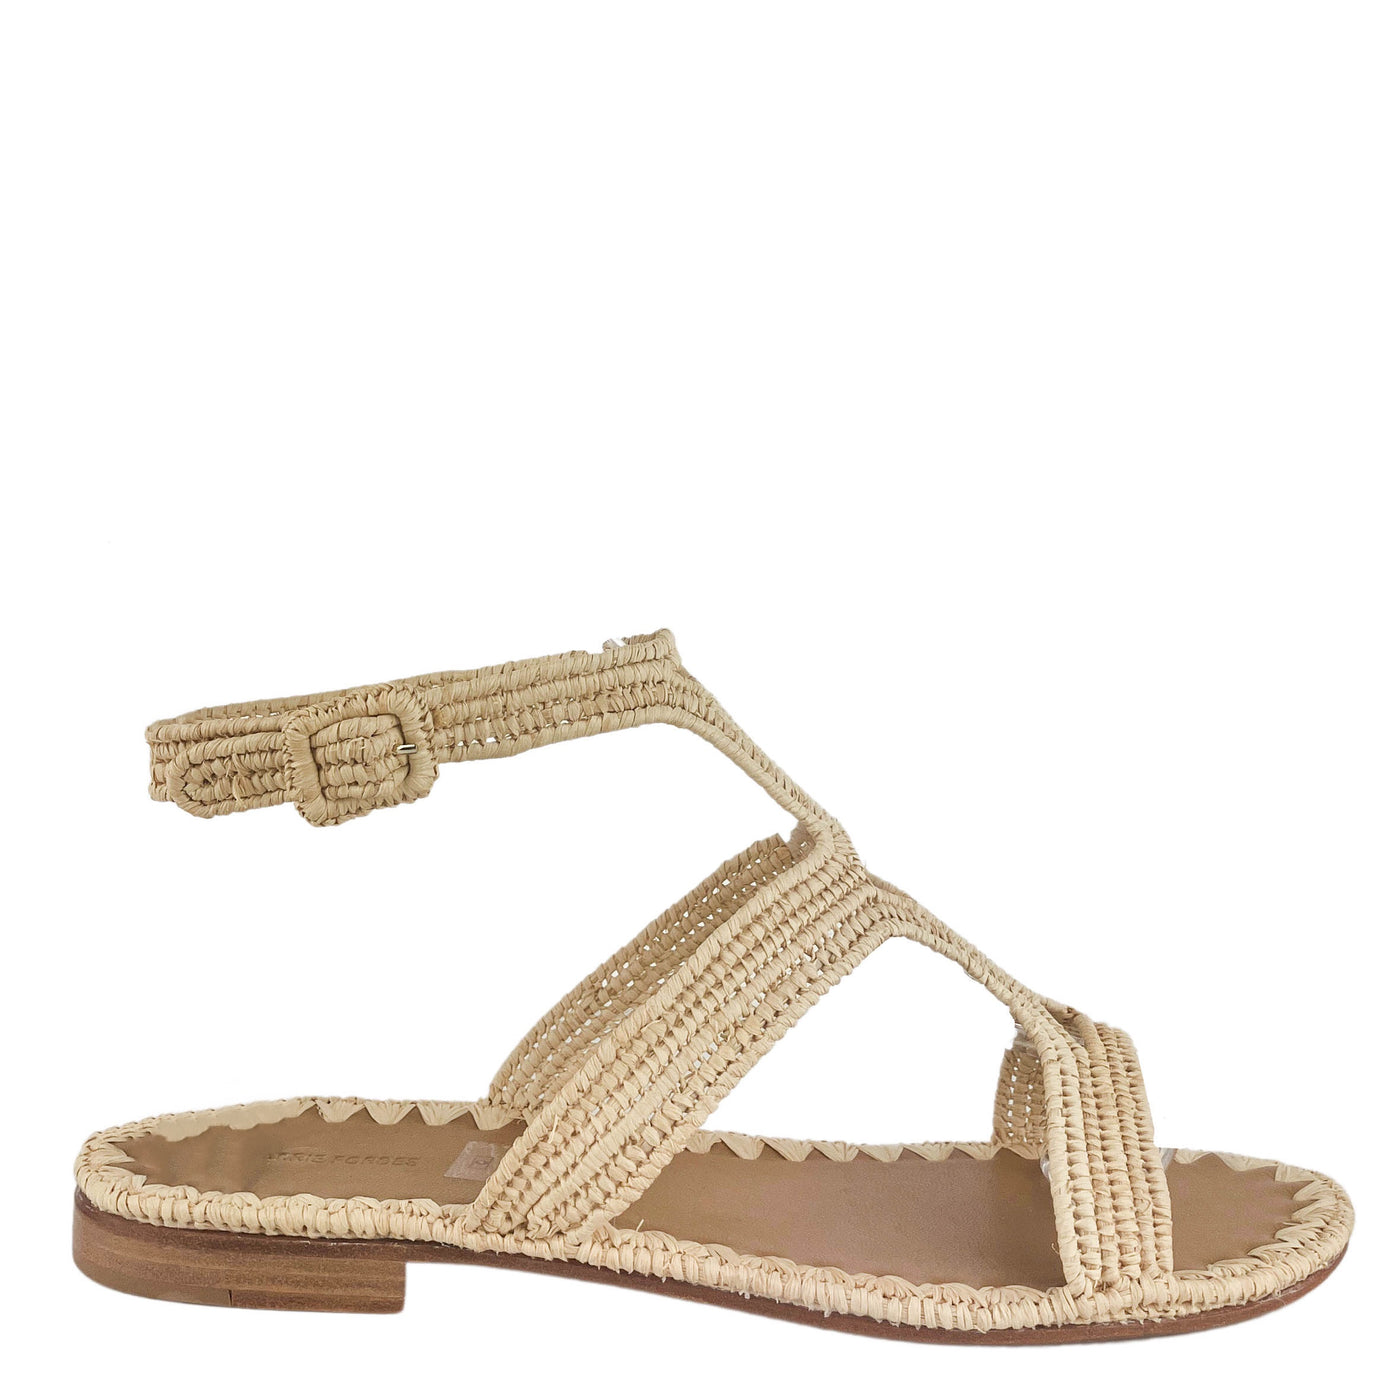 Carrie Forbes Hind Raffia Slides in Natural - Discounts on Carrie Forbes at UAL